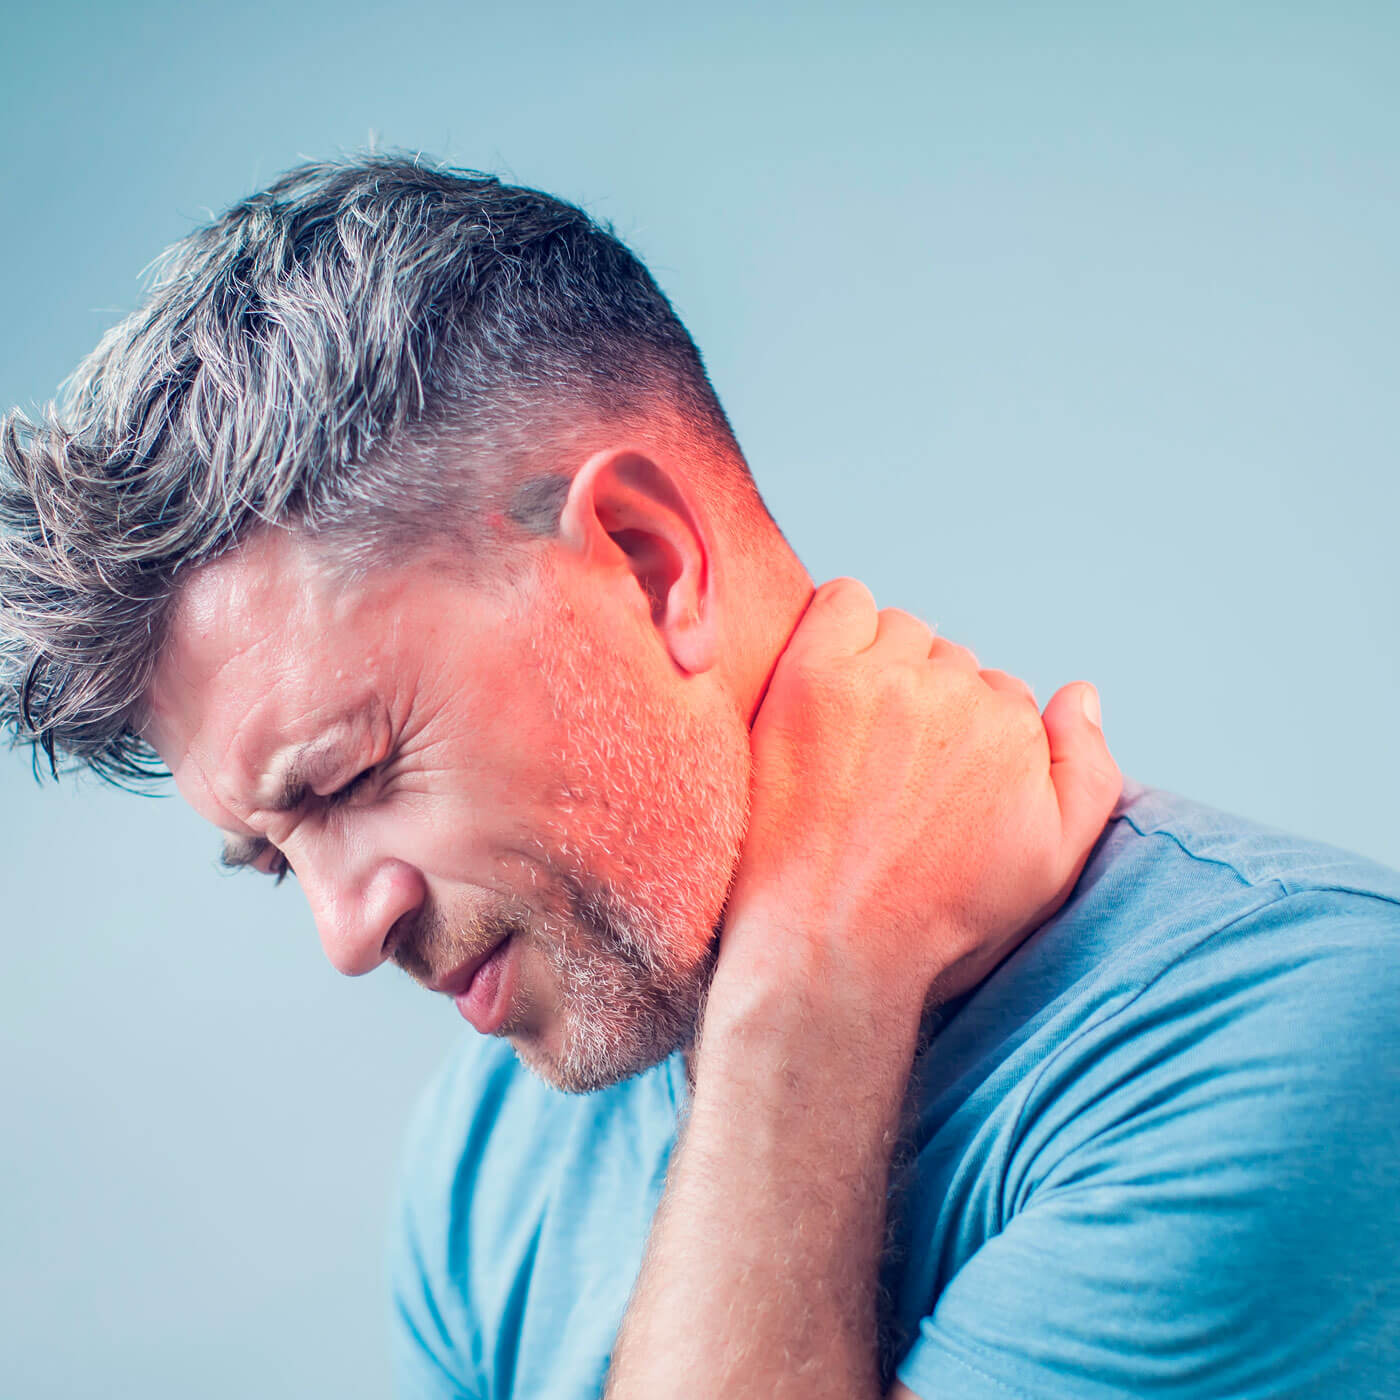 Essential Chiropractic and Healthcare Clinic- Chiropractic Conditions Treatment and Relief Tired Sore Neck Pain